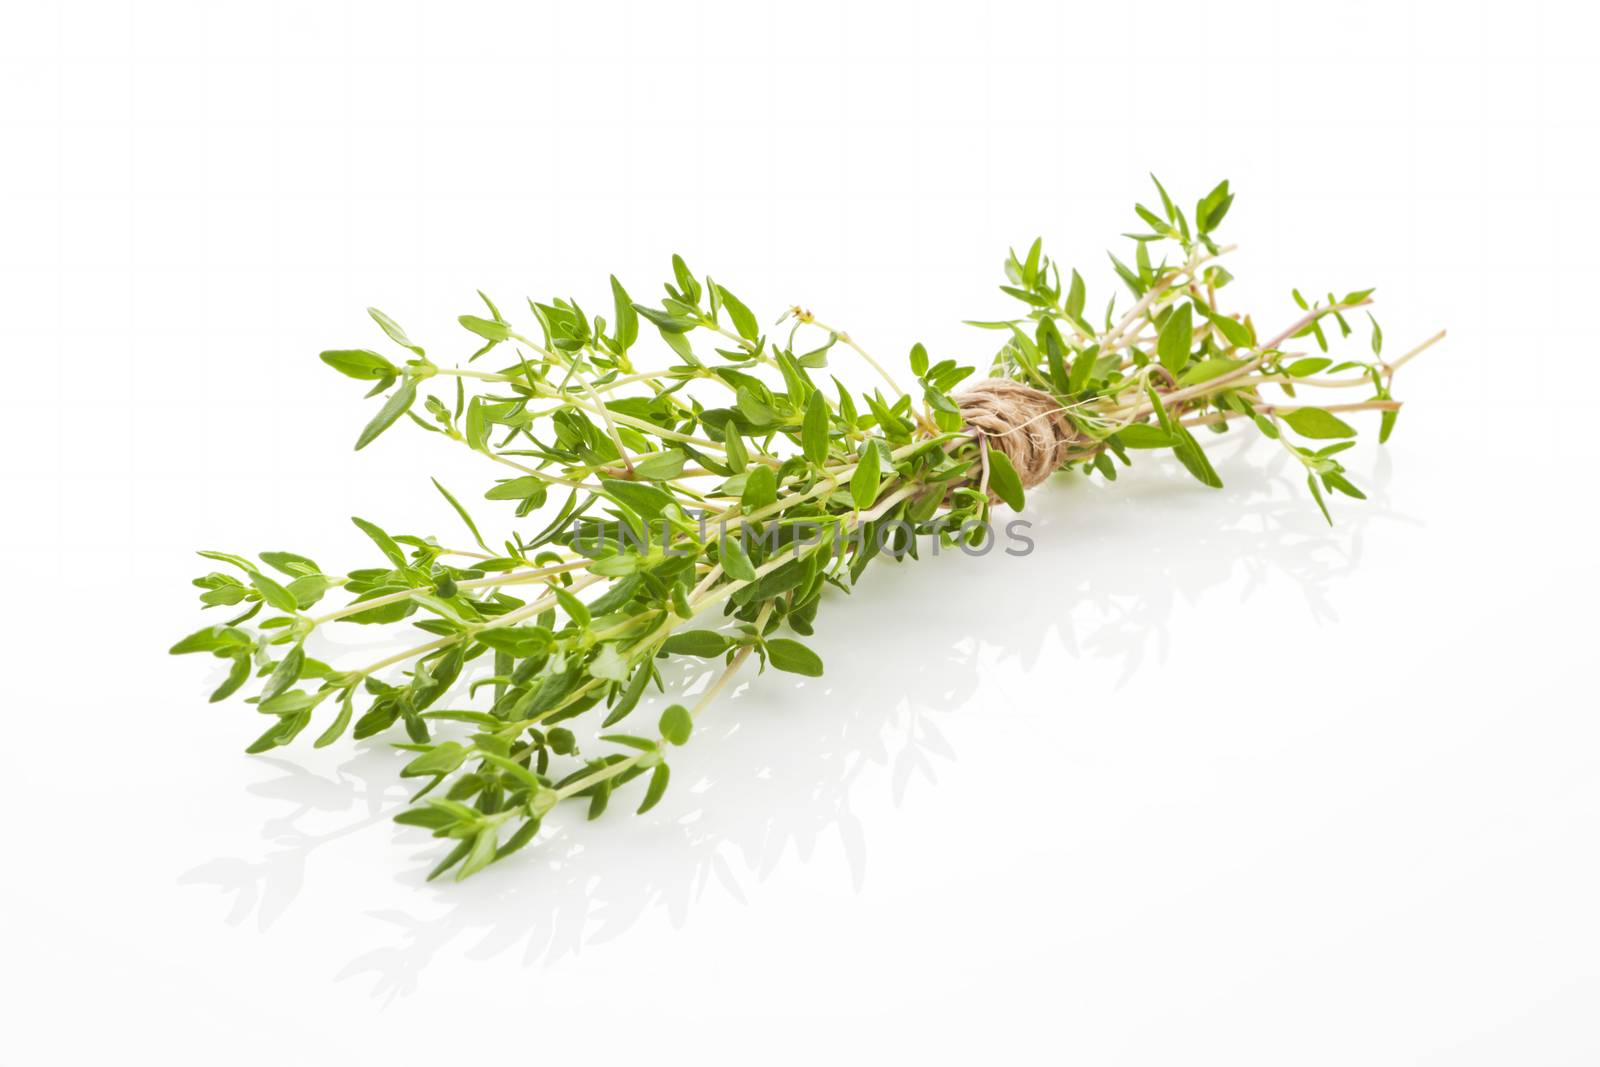 Organic fresh thyme bunch bound with brown twine isolated on white background. Aromatic culinary herbs.